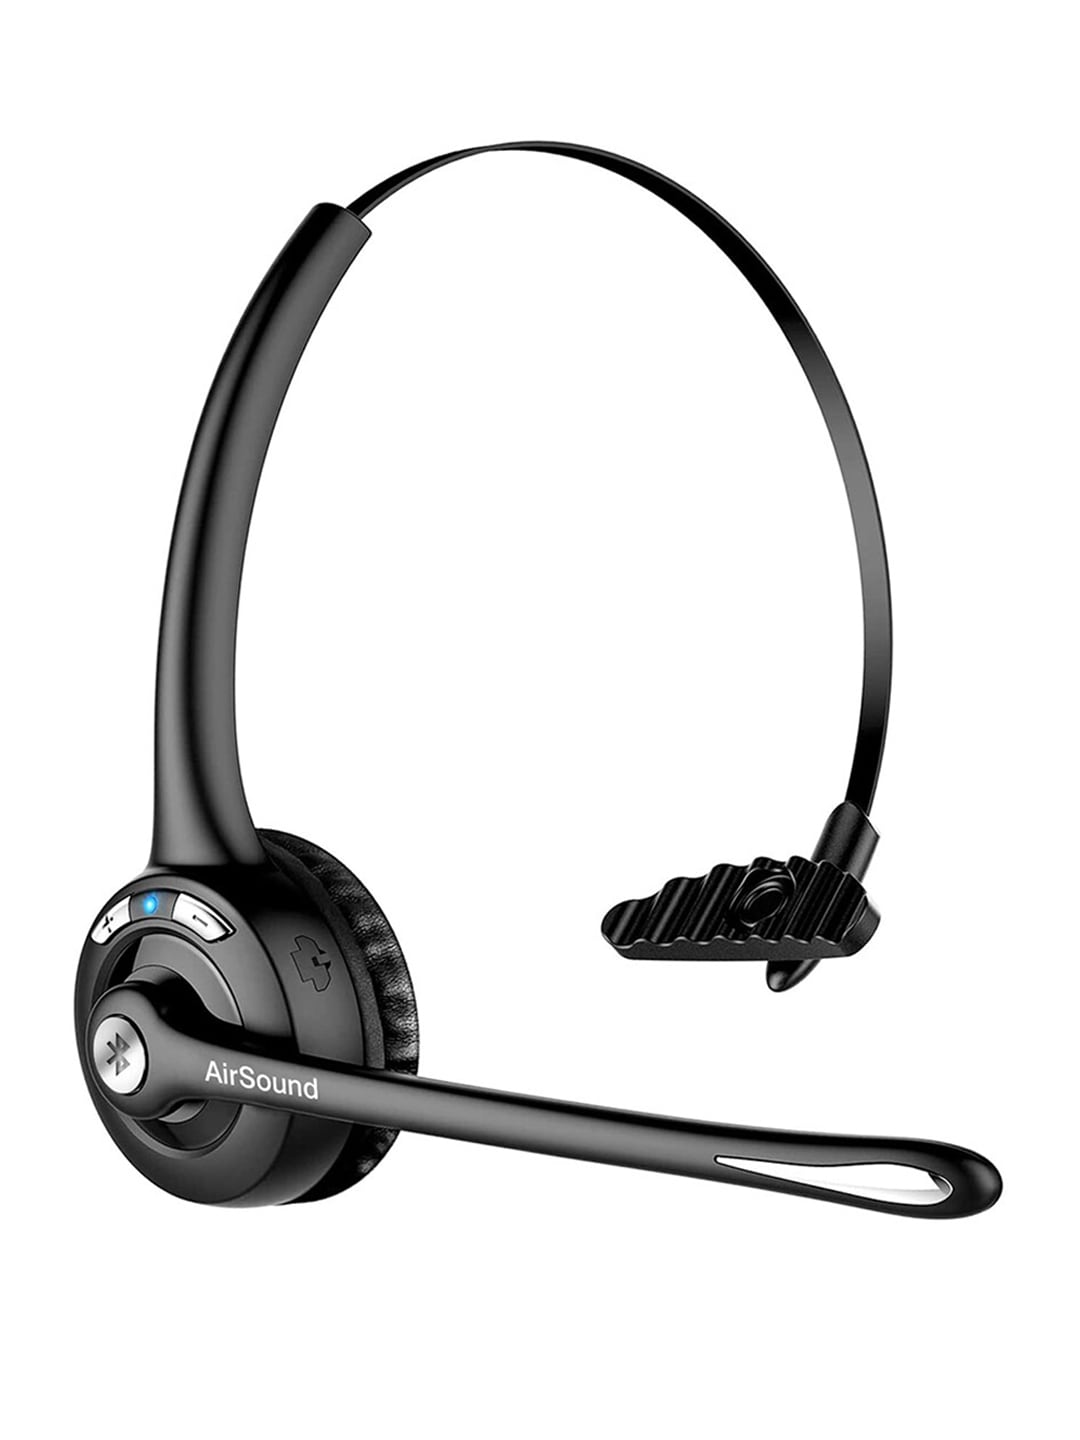 AirSound Unisex Black Wireless Bluetooth Over-The-Head Headset Price in India